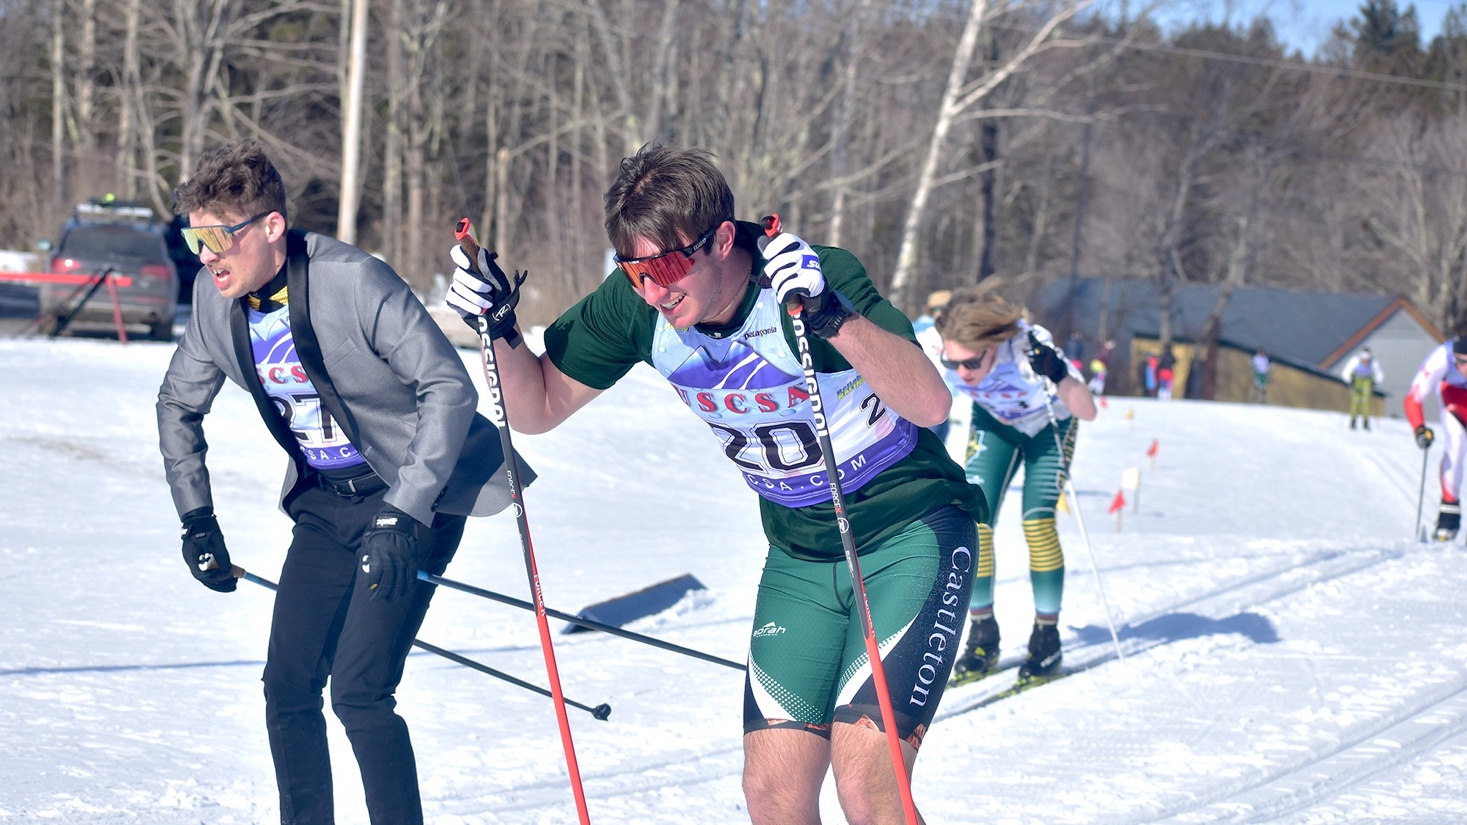 Interested in Cross Country Skiing?